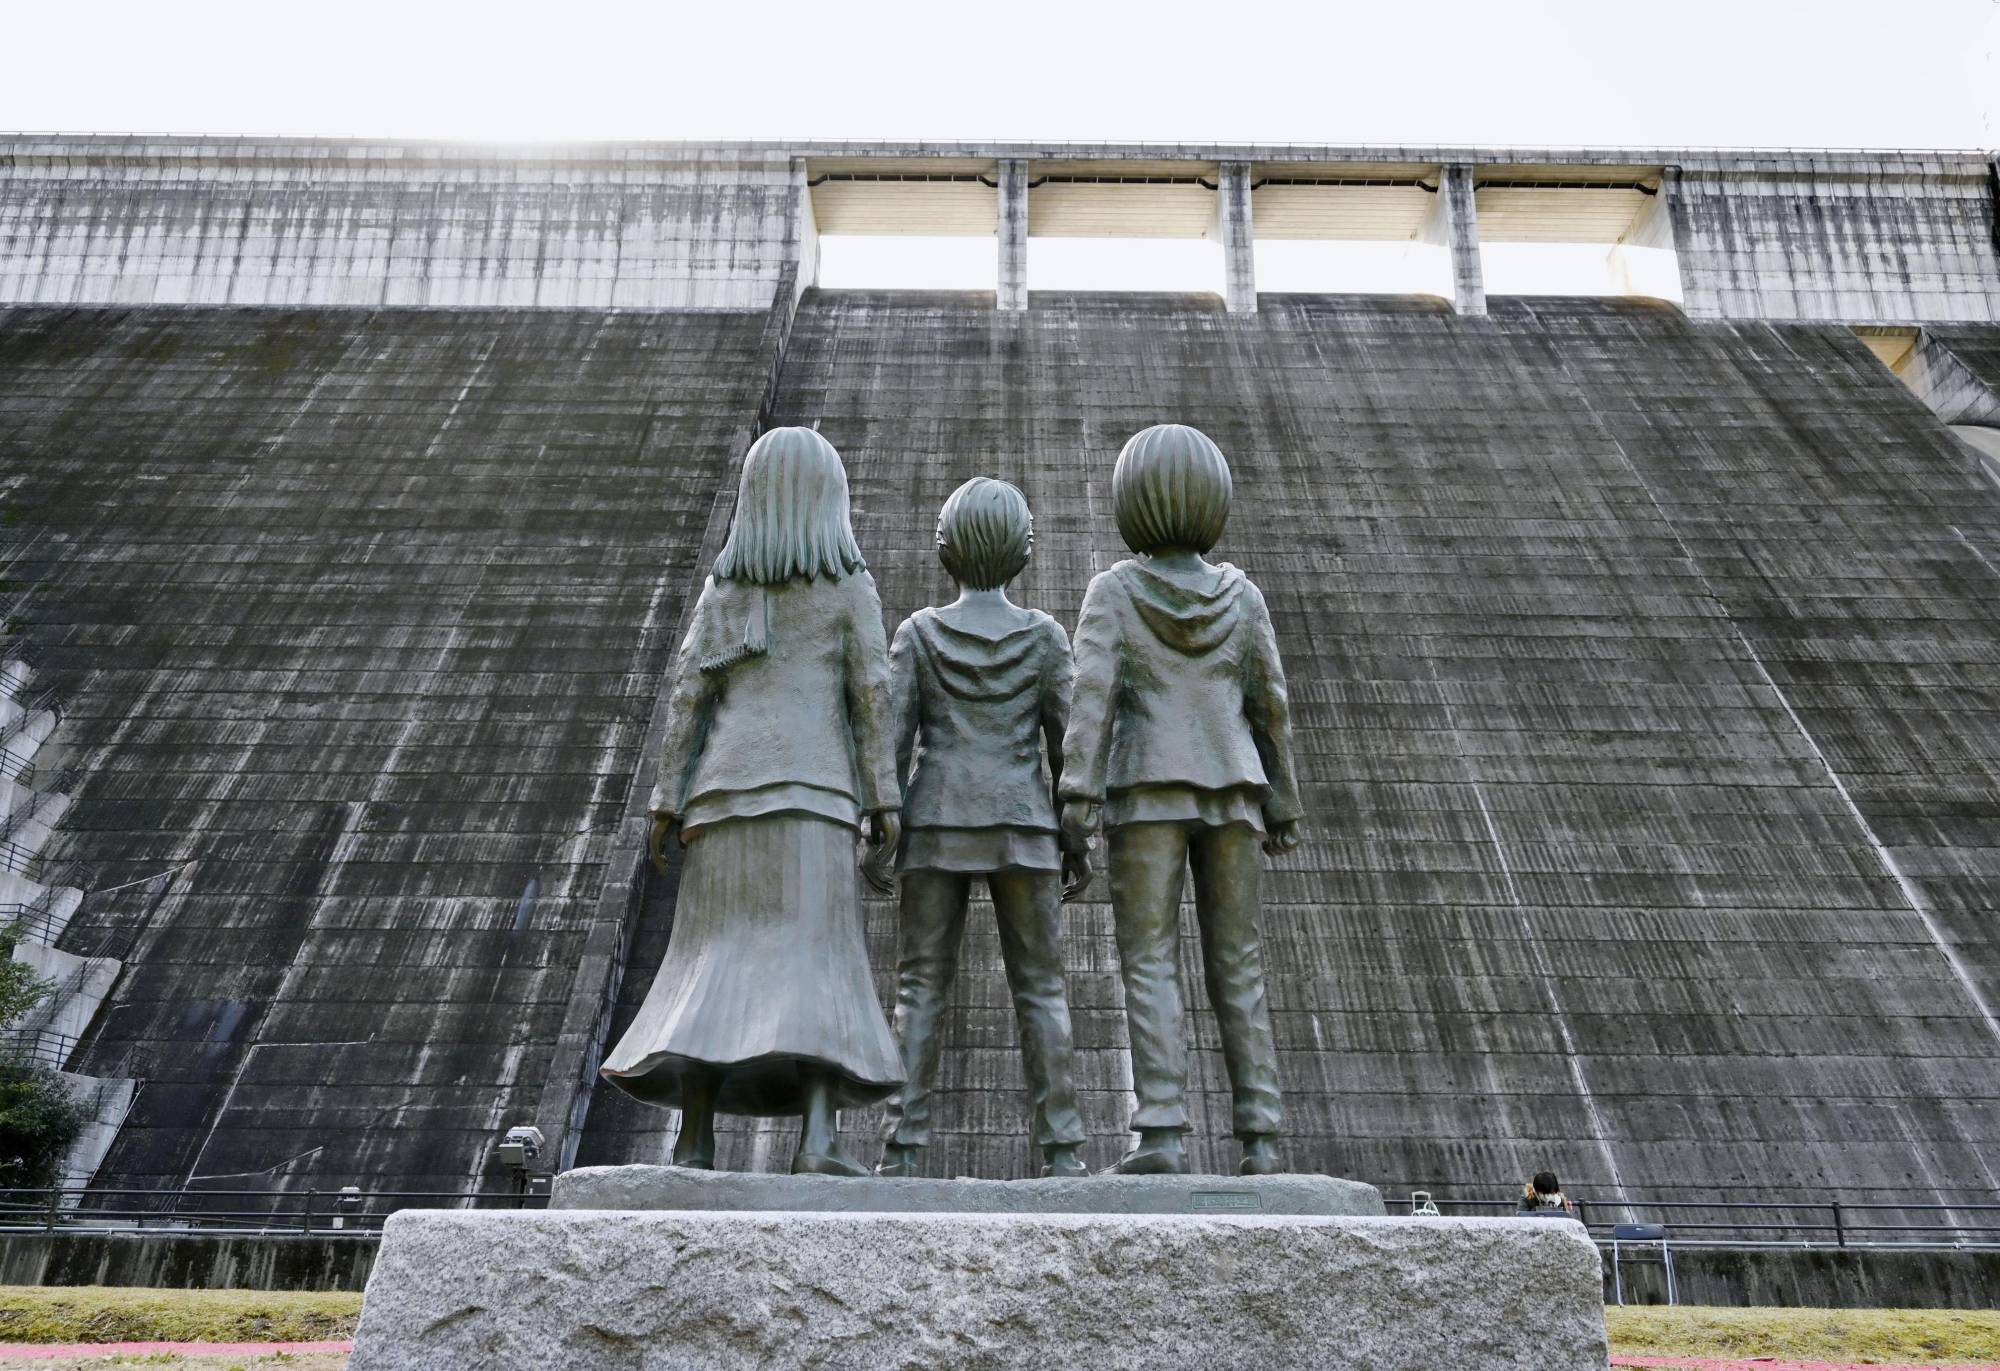 Us against the world: A bronze statue of 'Attack on Titan' protagonist Eren Yeager (center) and other characters in the manga series stands downstream of Oyama Dam in Oita Prefecture. The monument is a reproduction of a famous scene in which the trio encounter the Titans.  | KYODO